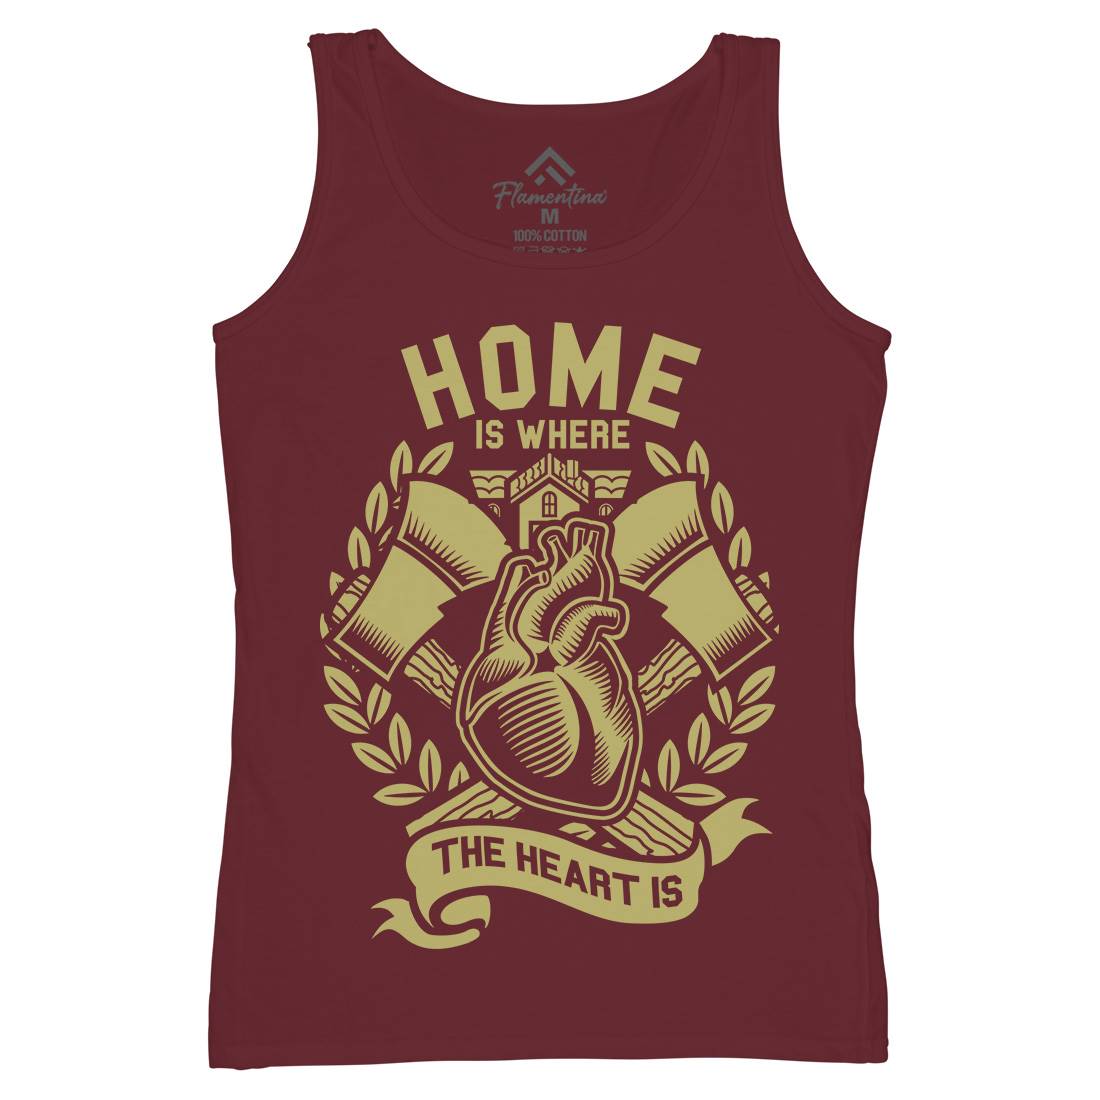 Home Womens Organic Tank Top Vest Quotes A241